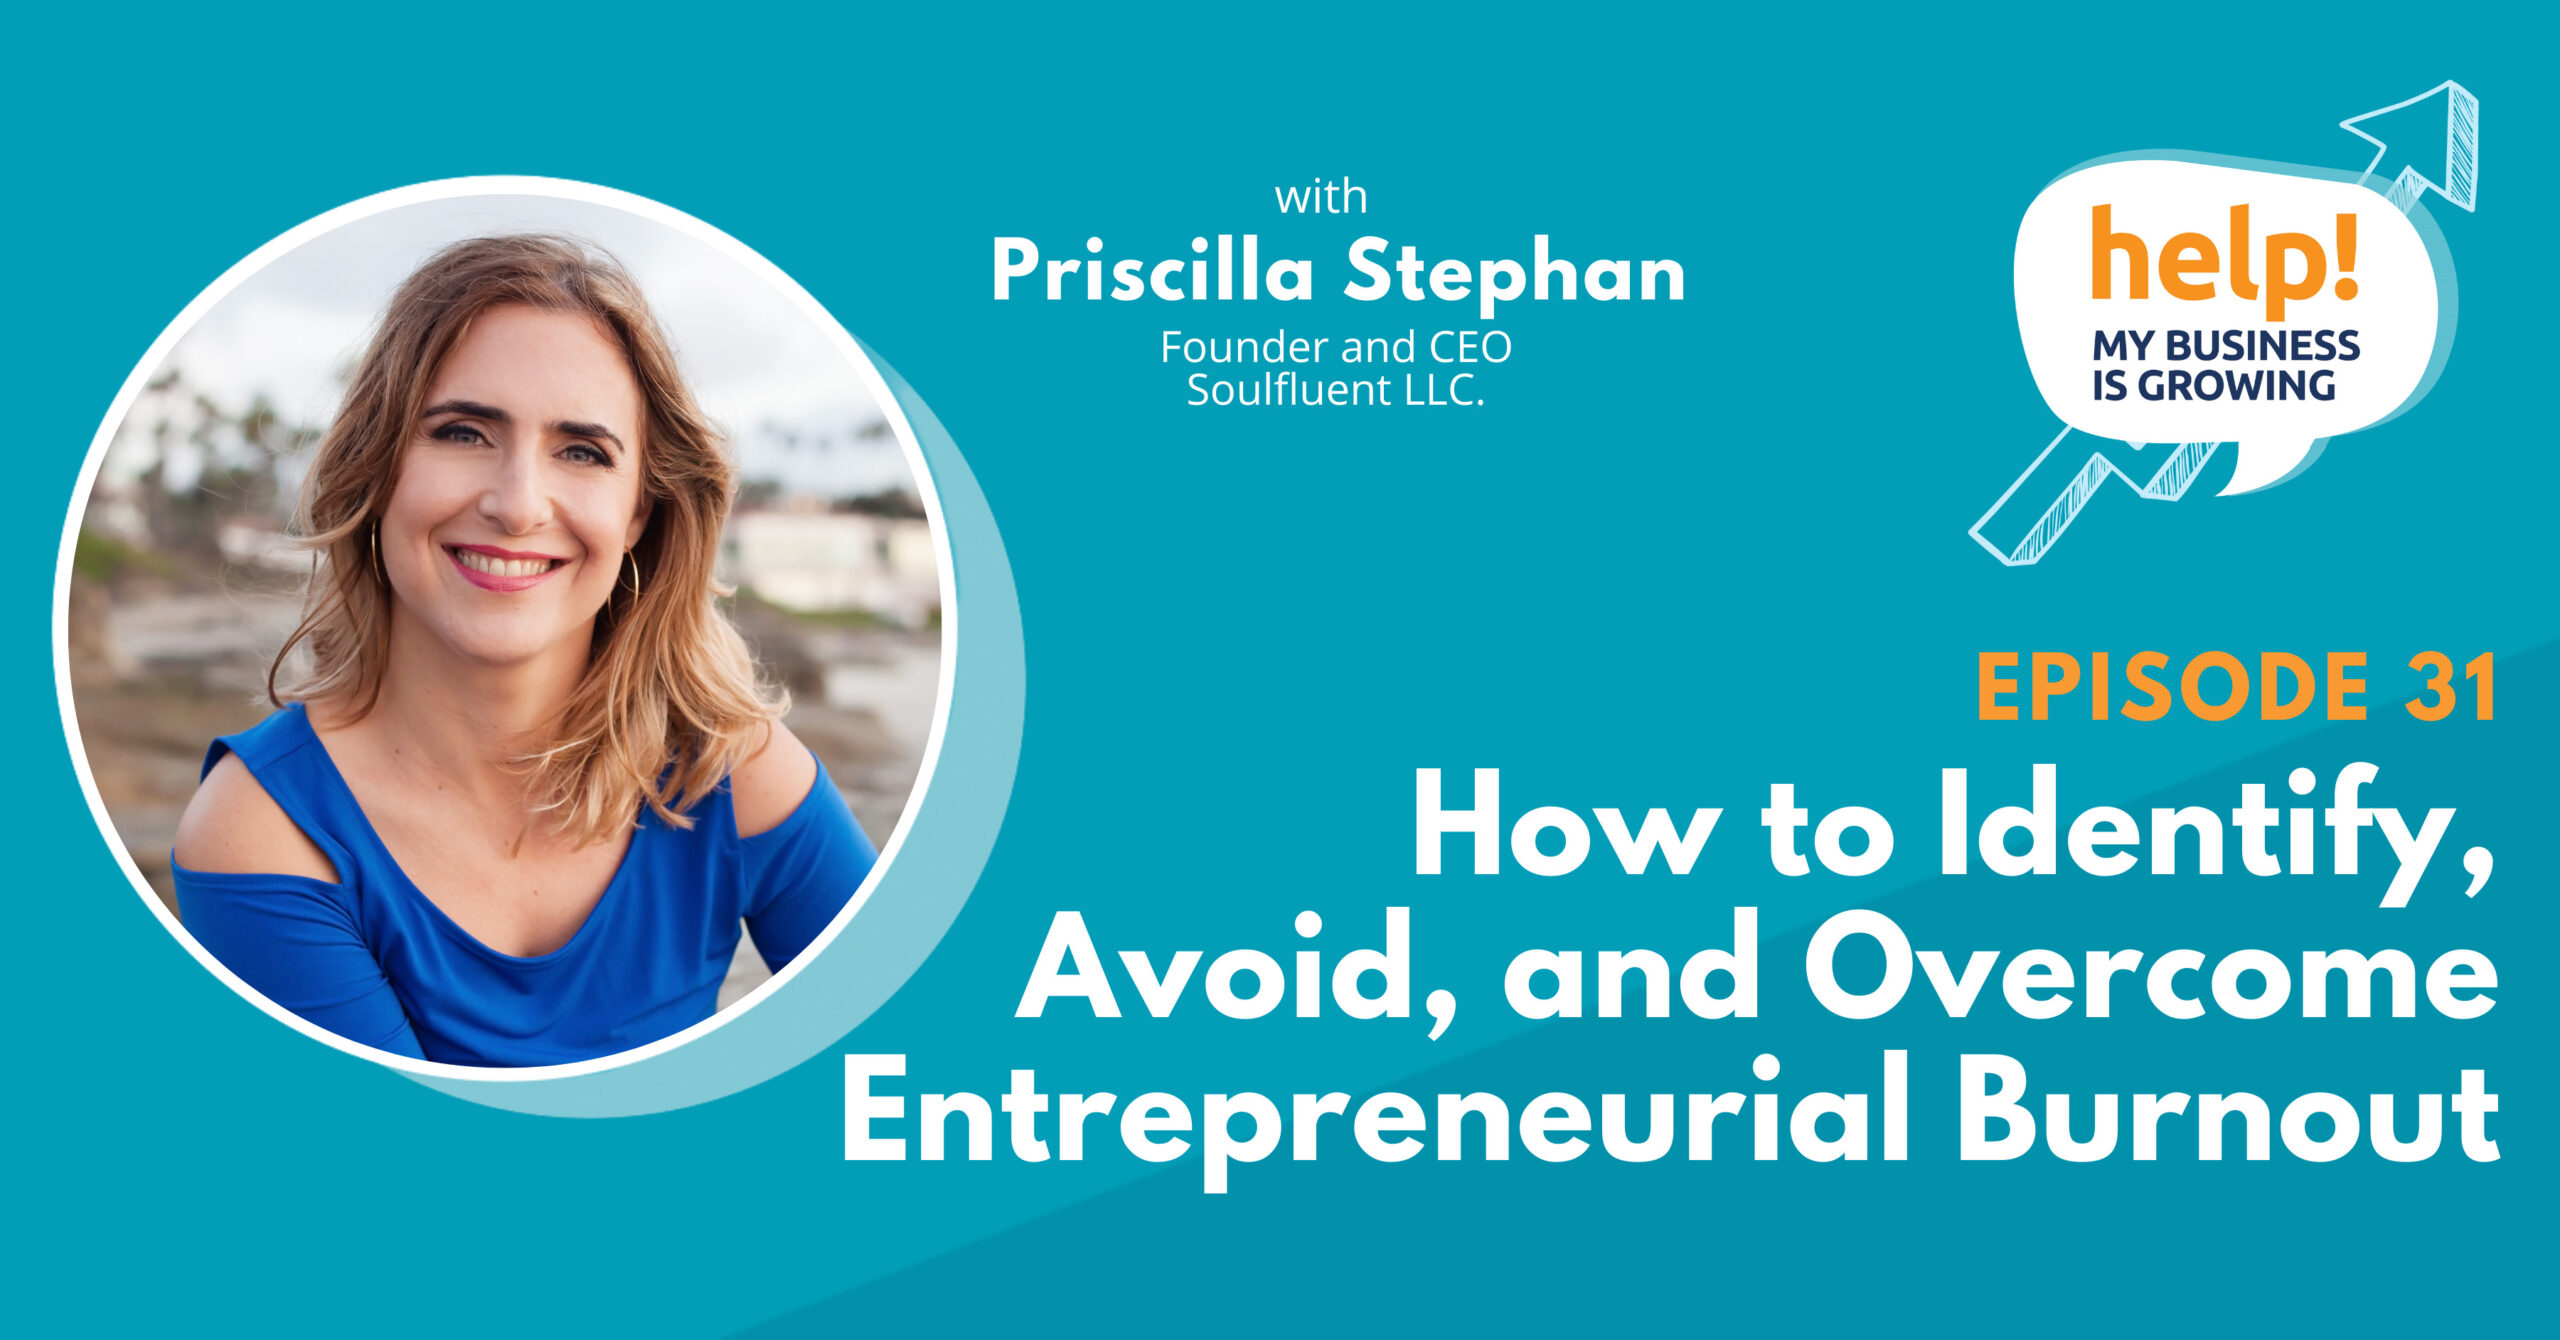 How To Identify, Avoid, and Overcome Entrepreneurial Burnout